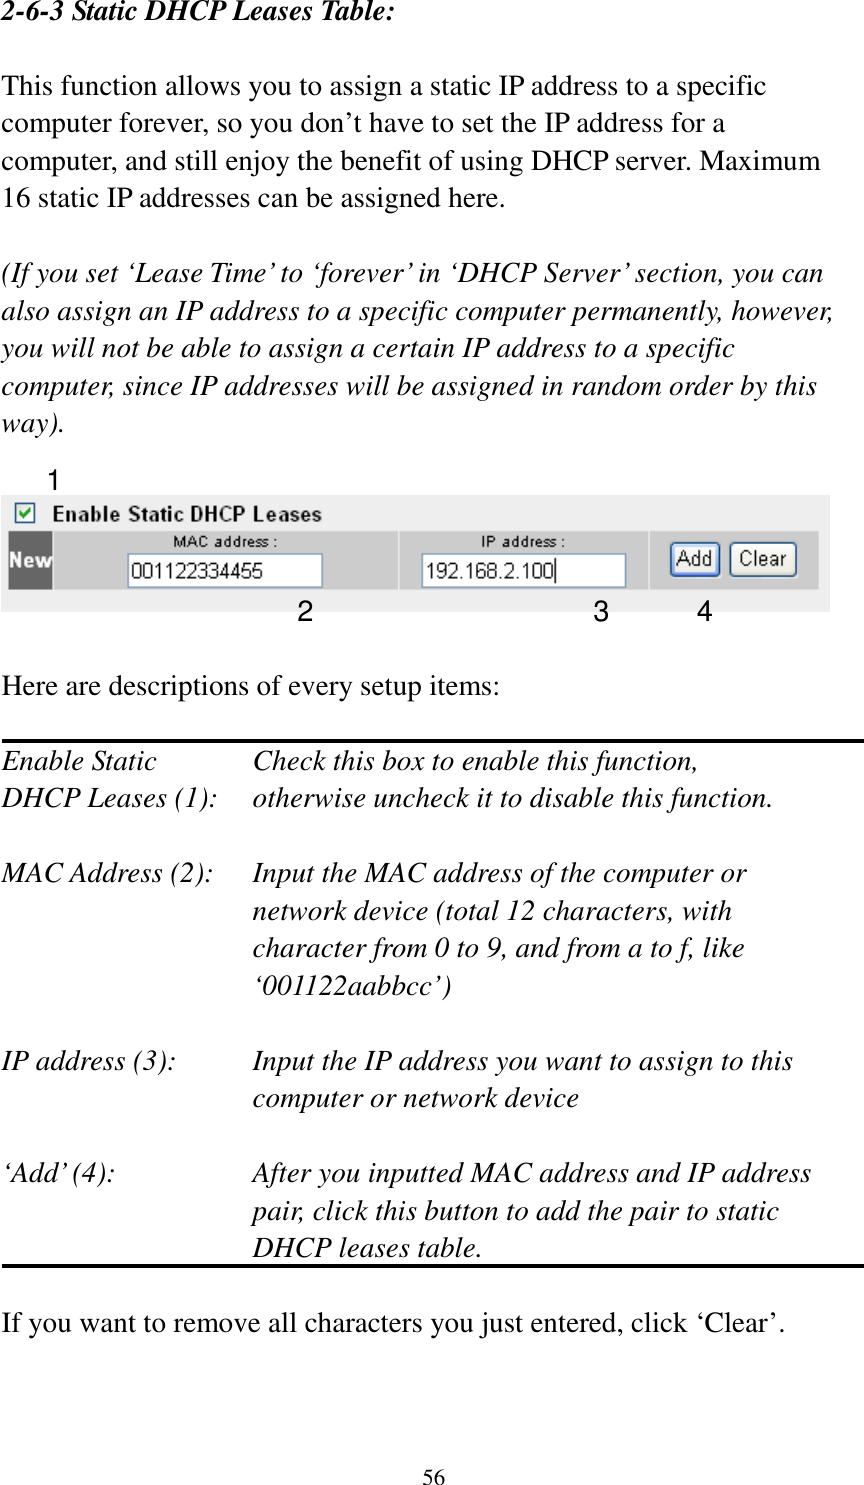 56 2-6-3 Static DHCP Leases Table:  This function allows you to assign a static IP address to a specific computer forever, so you don’t have to set the IP address for a computer, and still enjoy the benefit of using DHCP server. Maximum 16 static IP addresses can be assigned here.  (If you set ‘Lease Time’ to ‘forever’ in ‘DHCP Server’ section, you can also assign an IP address to a specific computer permanently, however, you will not be able to assign a certain IP address to a specific computer, since IP addresses will be assigned in random order by this way).      Here are descriptions of every setup items:  Enable Static      Check this box to enable this function, DHCP Leases (1):    otherwise uncheck it to disable this function.  MAC Address (2):    Input the MAC address of the computer or network device (total 12 characters, with character from 0 to 9, and from a to f, like ‘001122aabbcc’)    IP address (3):    Input the IP address you want to assign to this computer or network device    ‘Add’ (4):    After you inputted MAC address and IP address pair, click this button to add the pair to static DHCP leases table.  If you want to remove all characters you just entered, click ‘Clear’.   1 2 3 4 